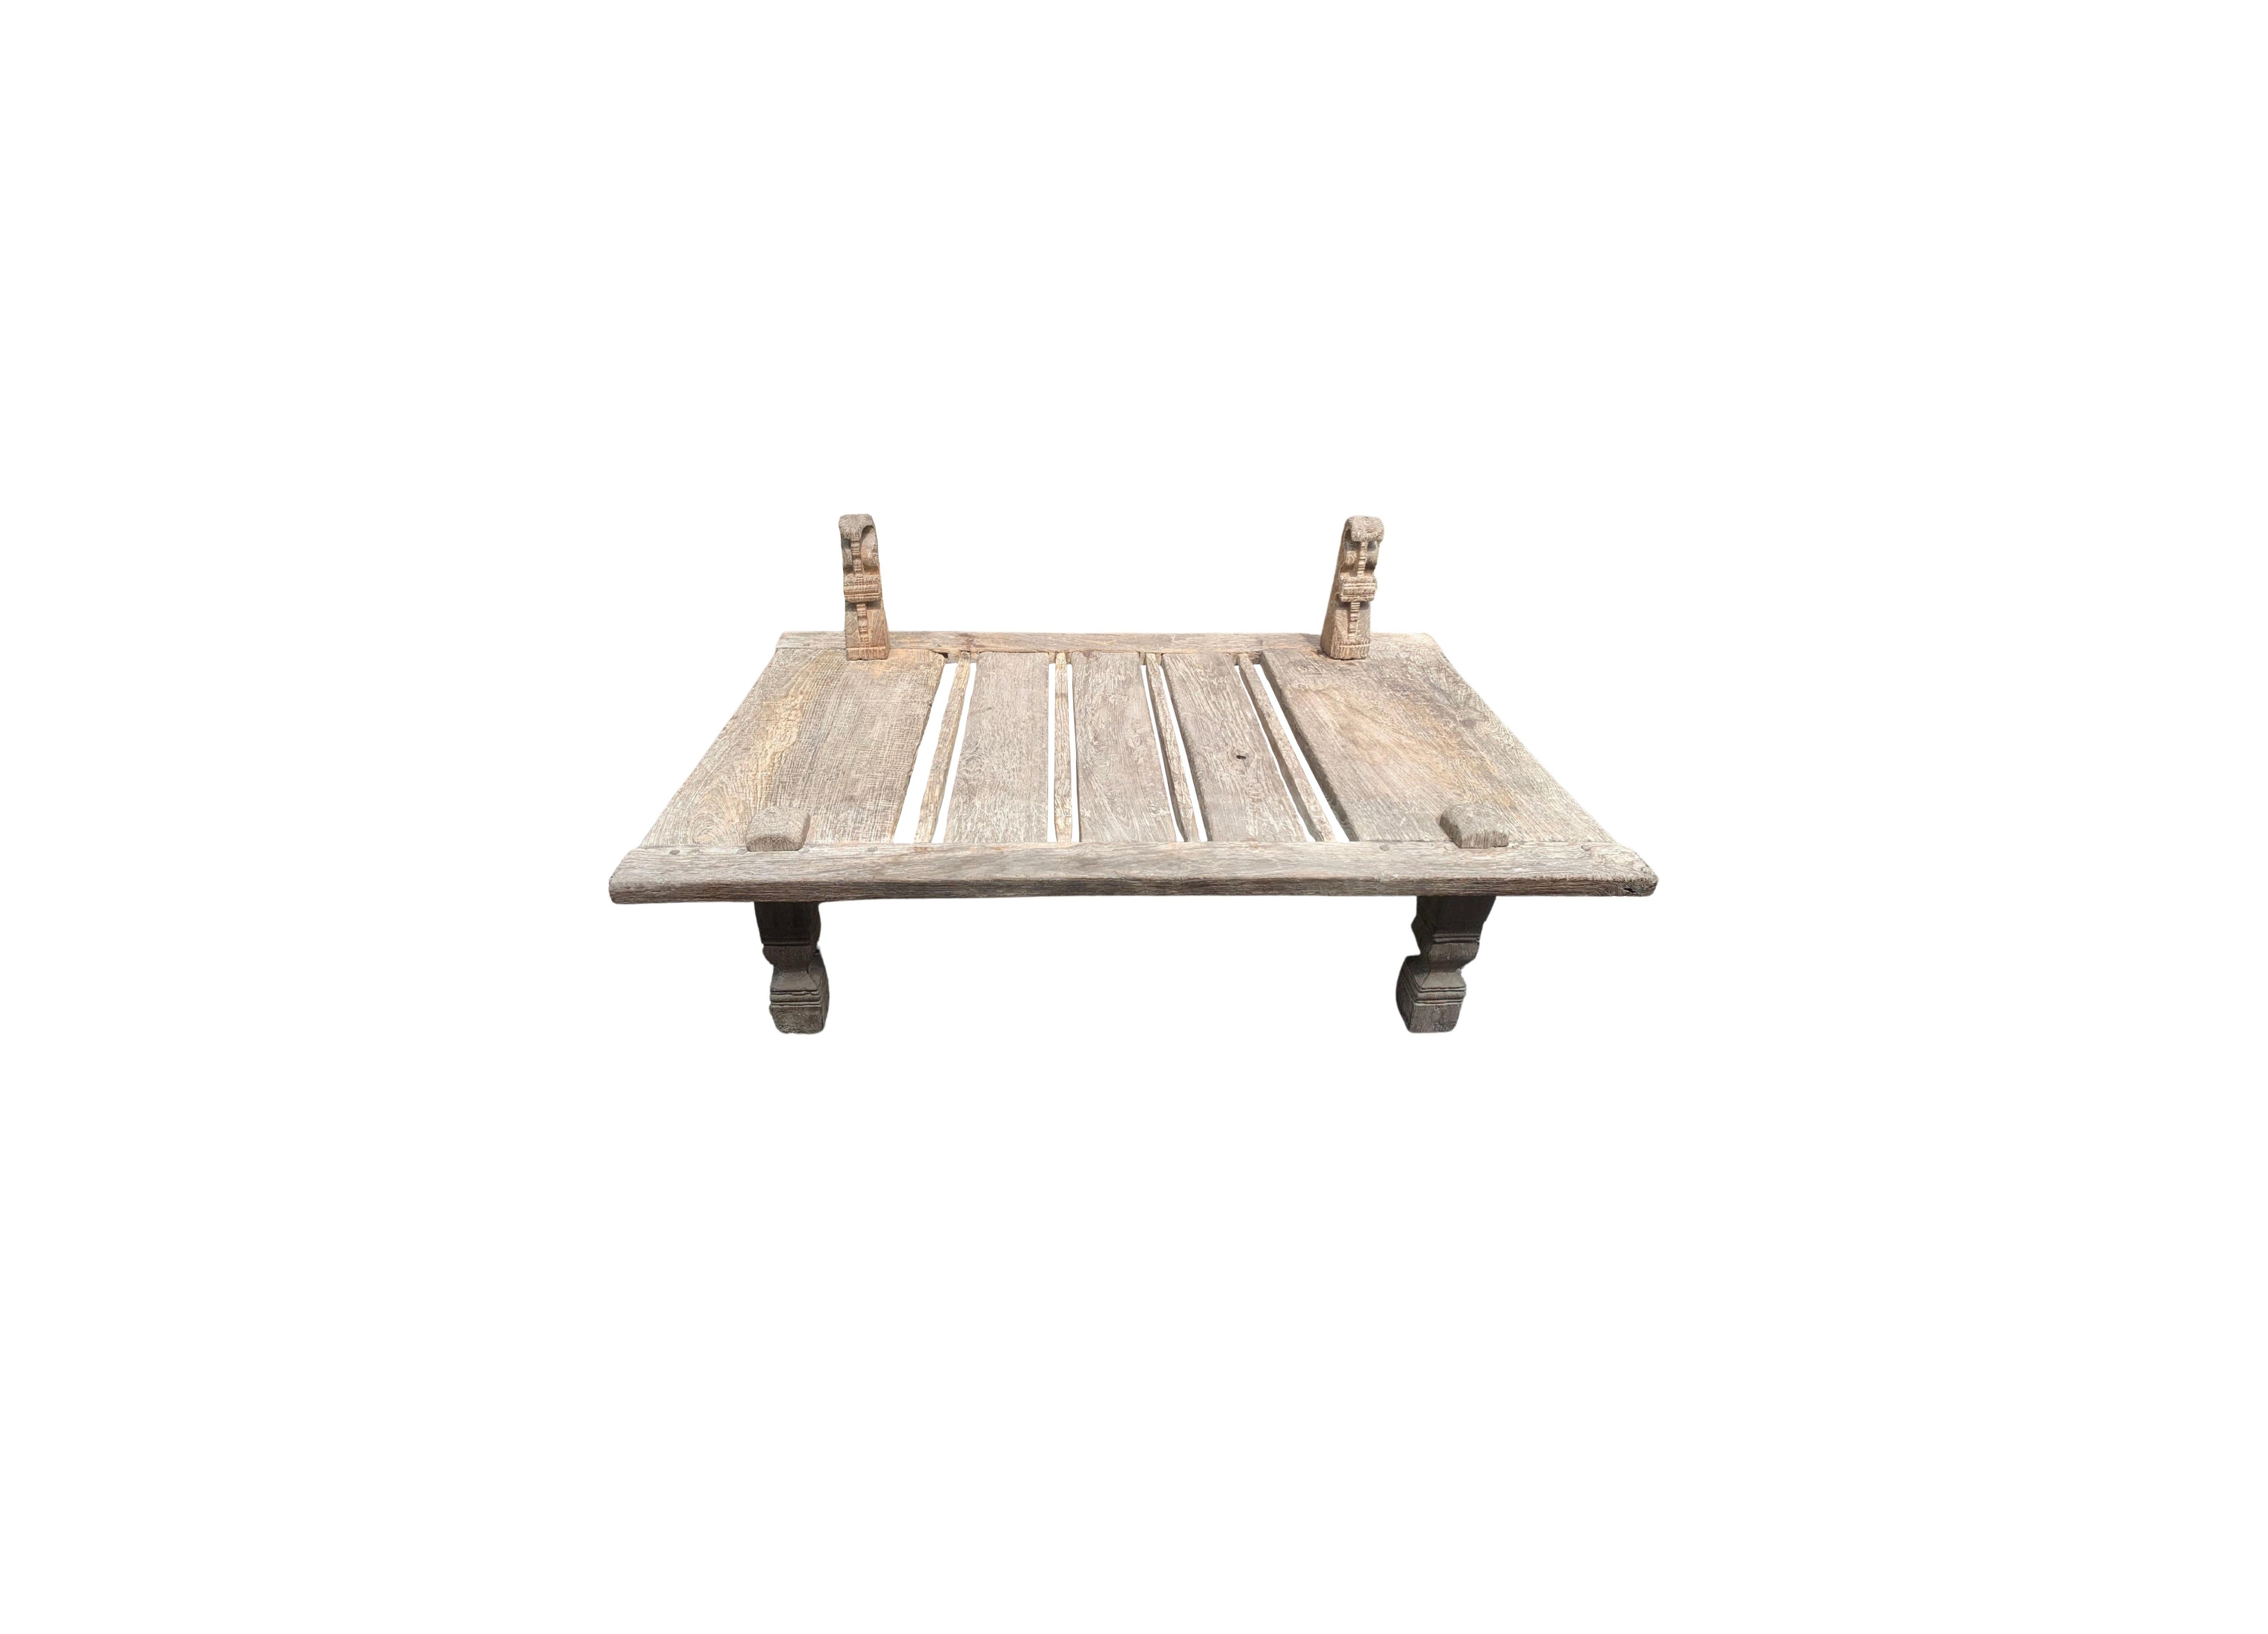 This solid teak weaving table was crafted in Java, Indonesia more than 100 years ago. It features extended columns on its top side which would have been used to hold horizontal weaving poles and help tighten fibres during the weaving process. An